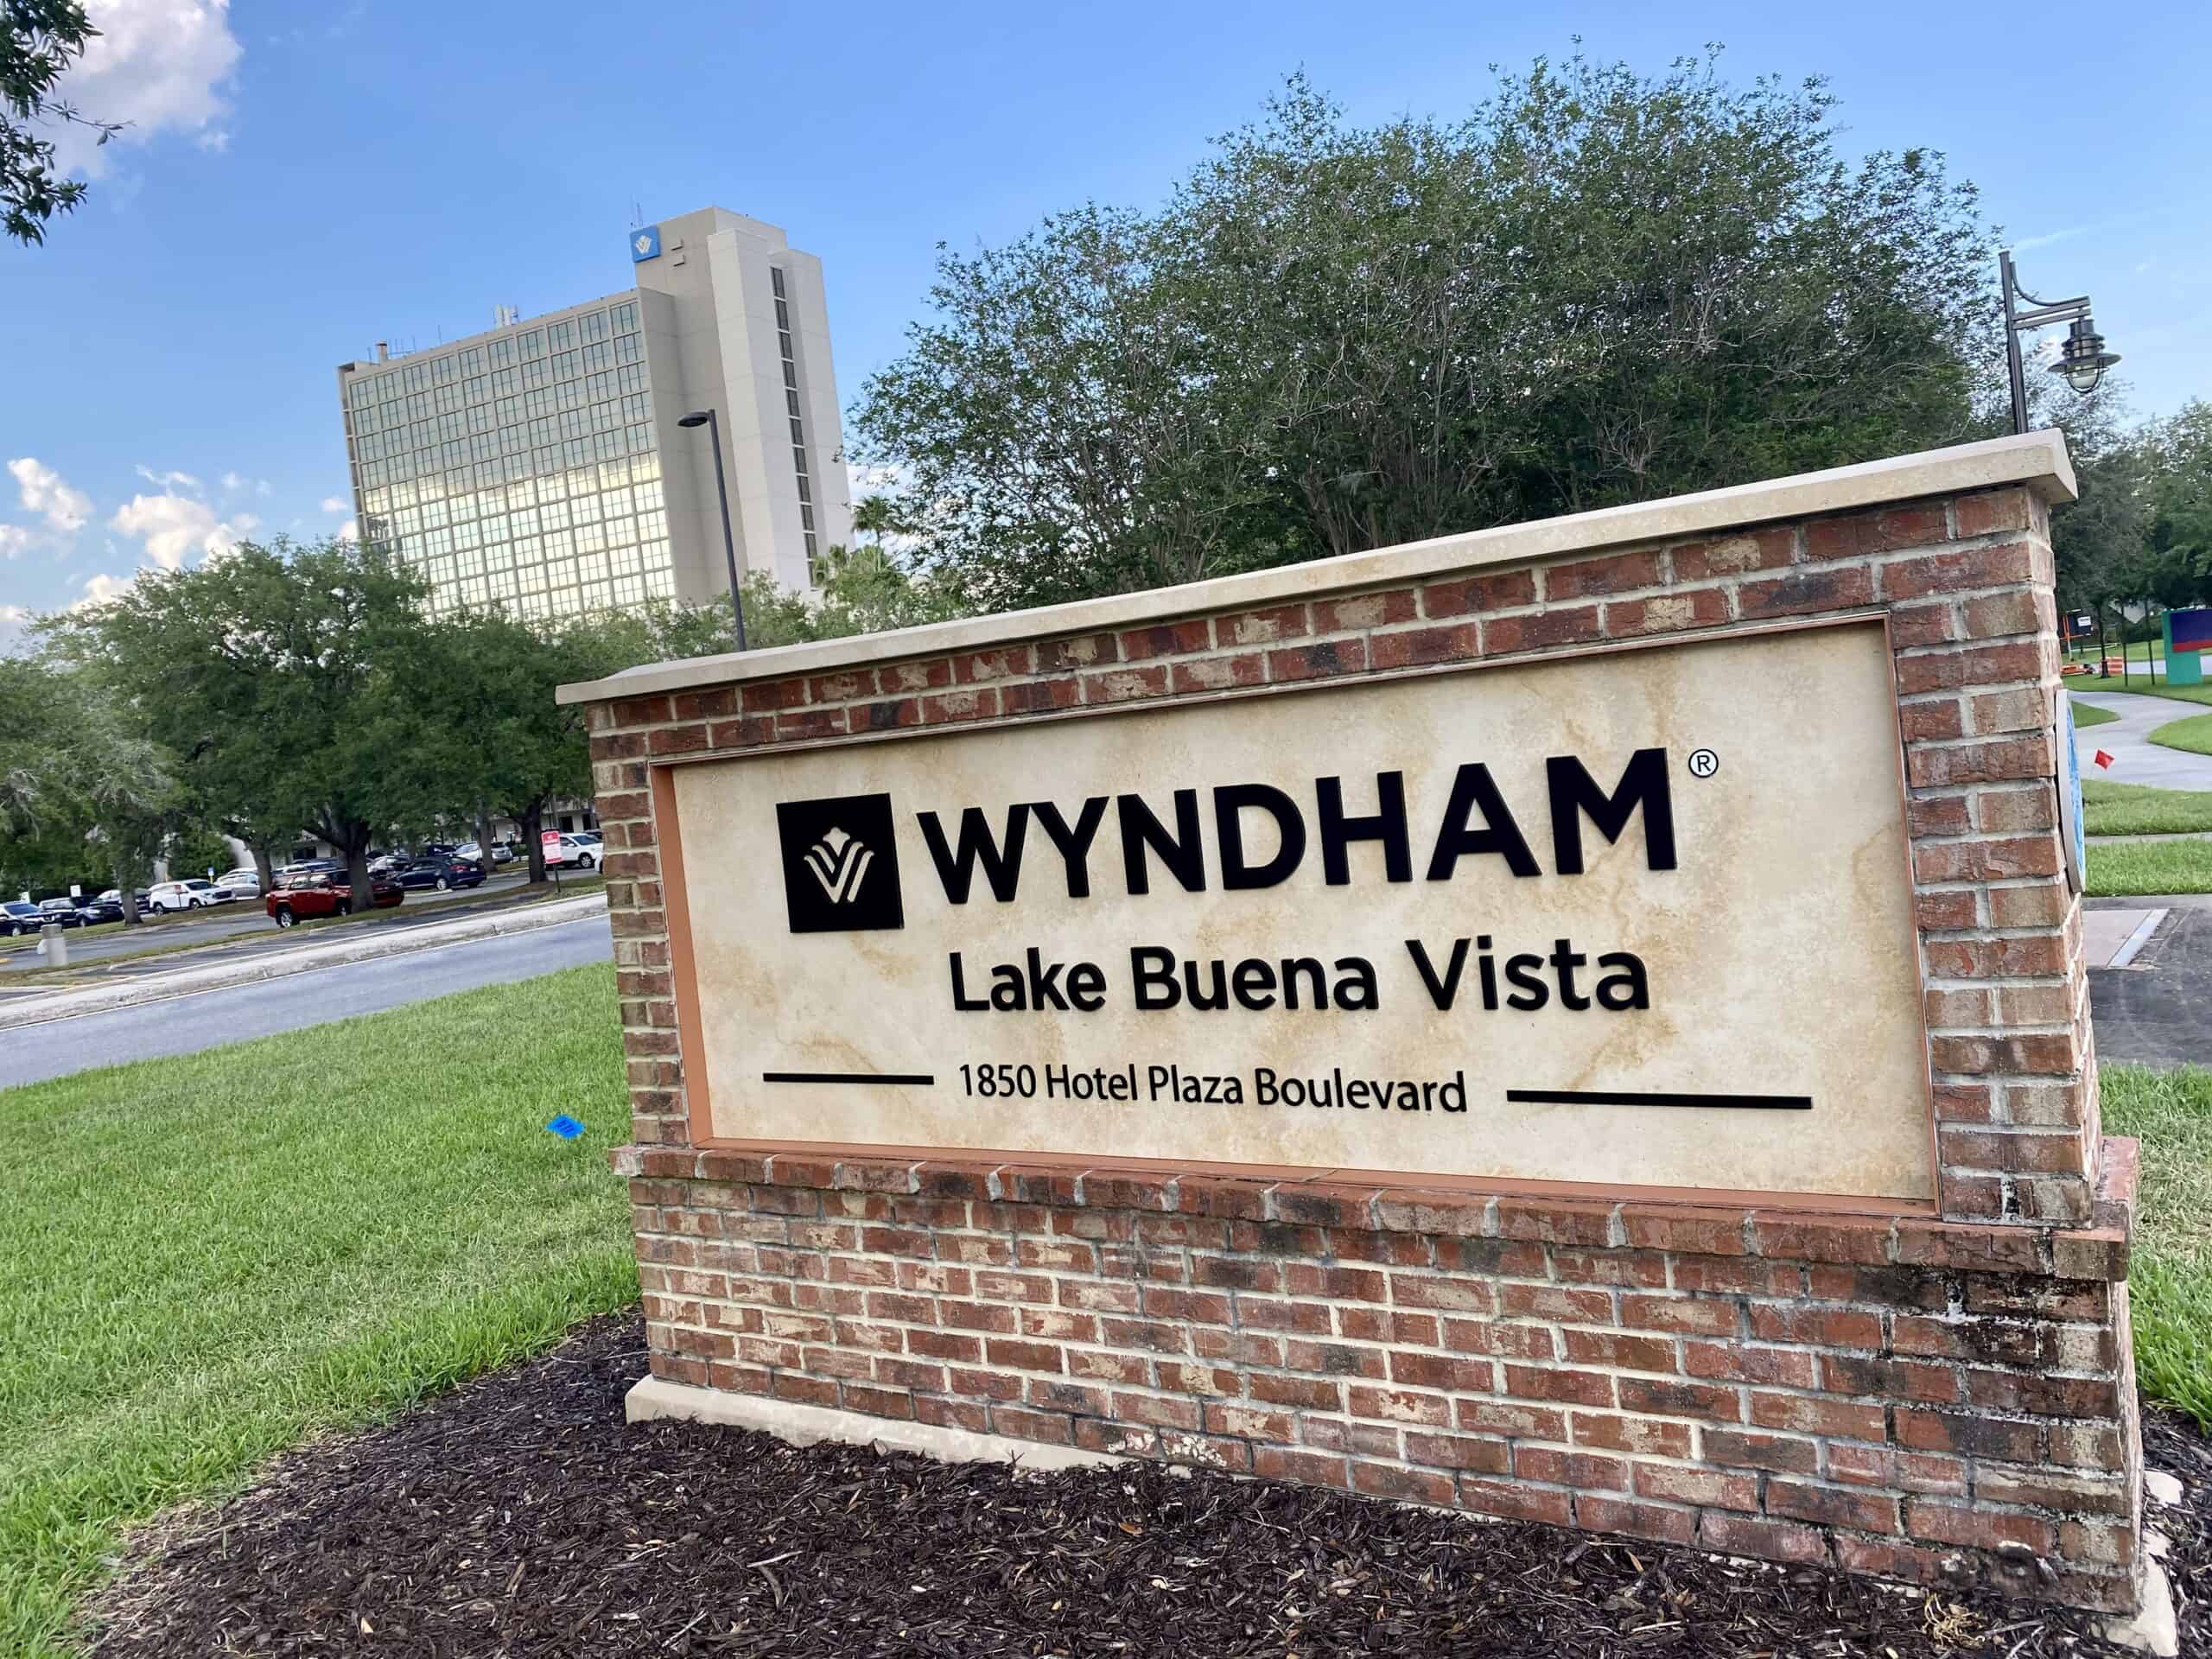 Wyndham Lake Buena Vista Exterior's is beige and tall, reflecting the nearby Disney Springs area. A sign made of bricks showcasing the name of the hotel, Wyndham Lake Buena Vista, stands along the walkway that leads to Disney Springs